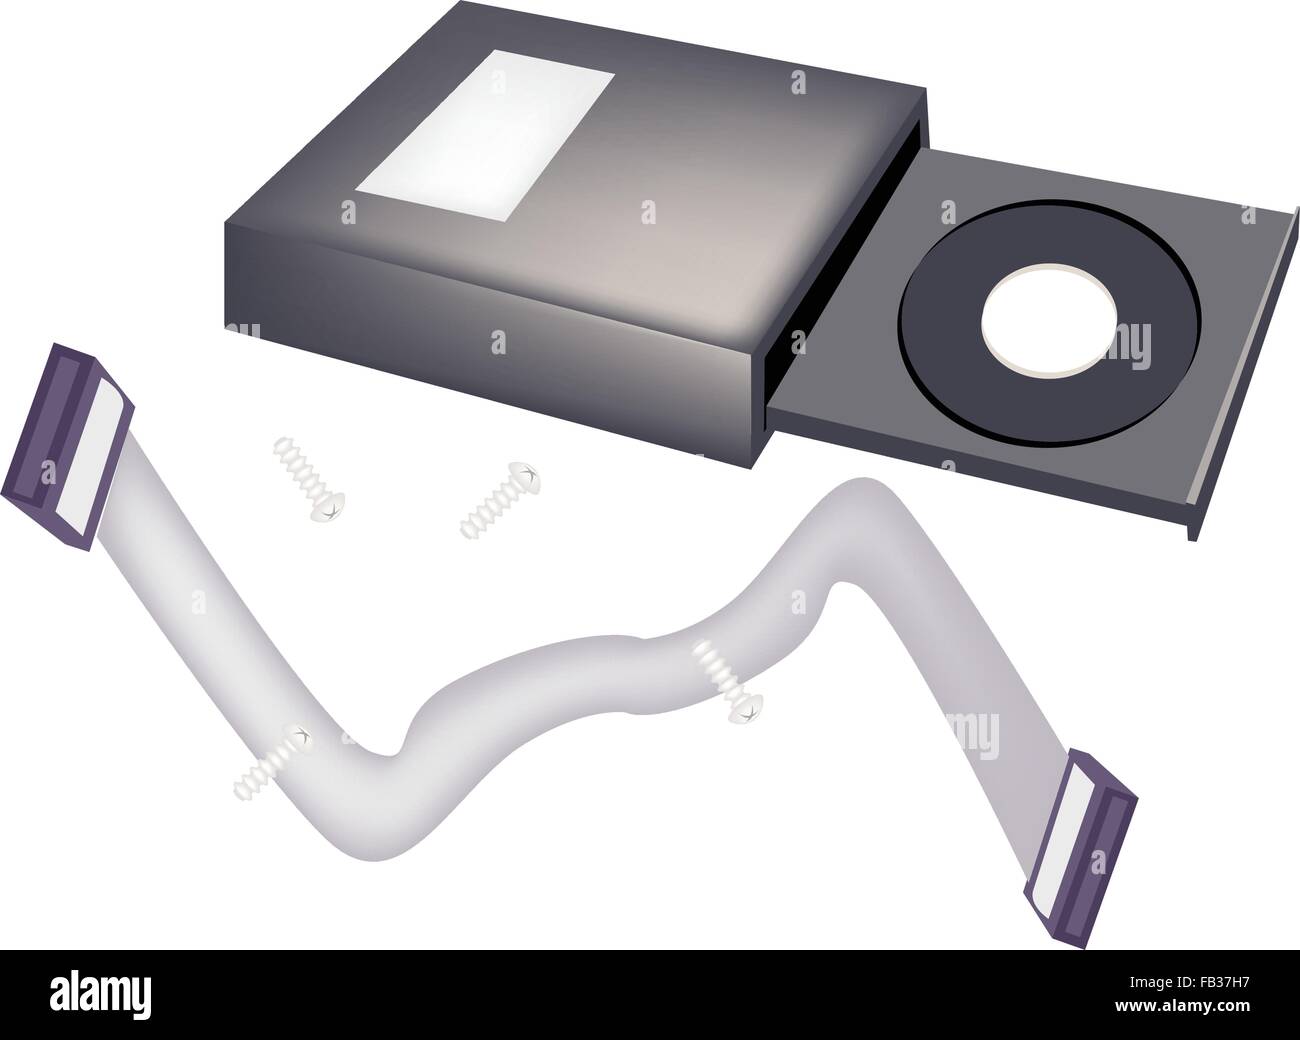 Computer and Technology, CD-ROM Disk Drive or Computer Drive Capable of Reading CD-ROM Discs for Desktop PC. Stock Vector